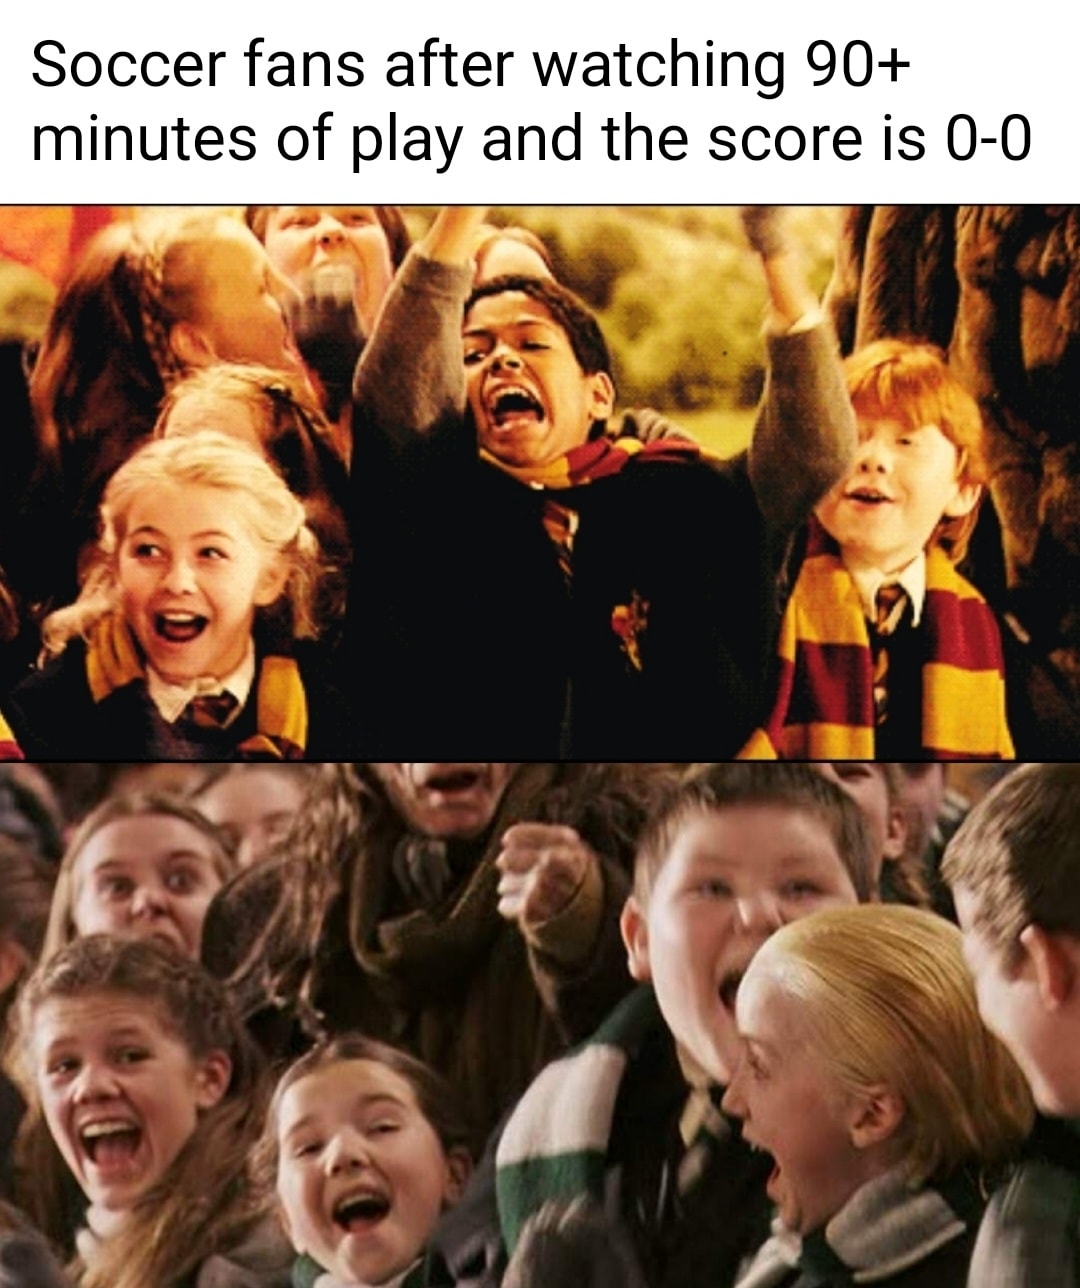 Harry Potter memes - human behavior - Soccer fans after watching 90 minutes of play and the score is 00